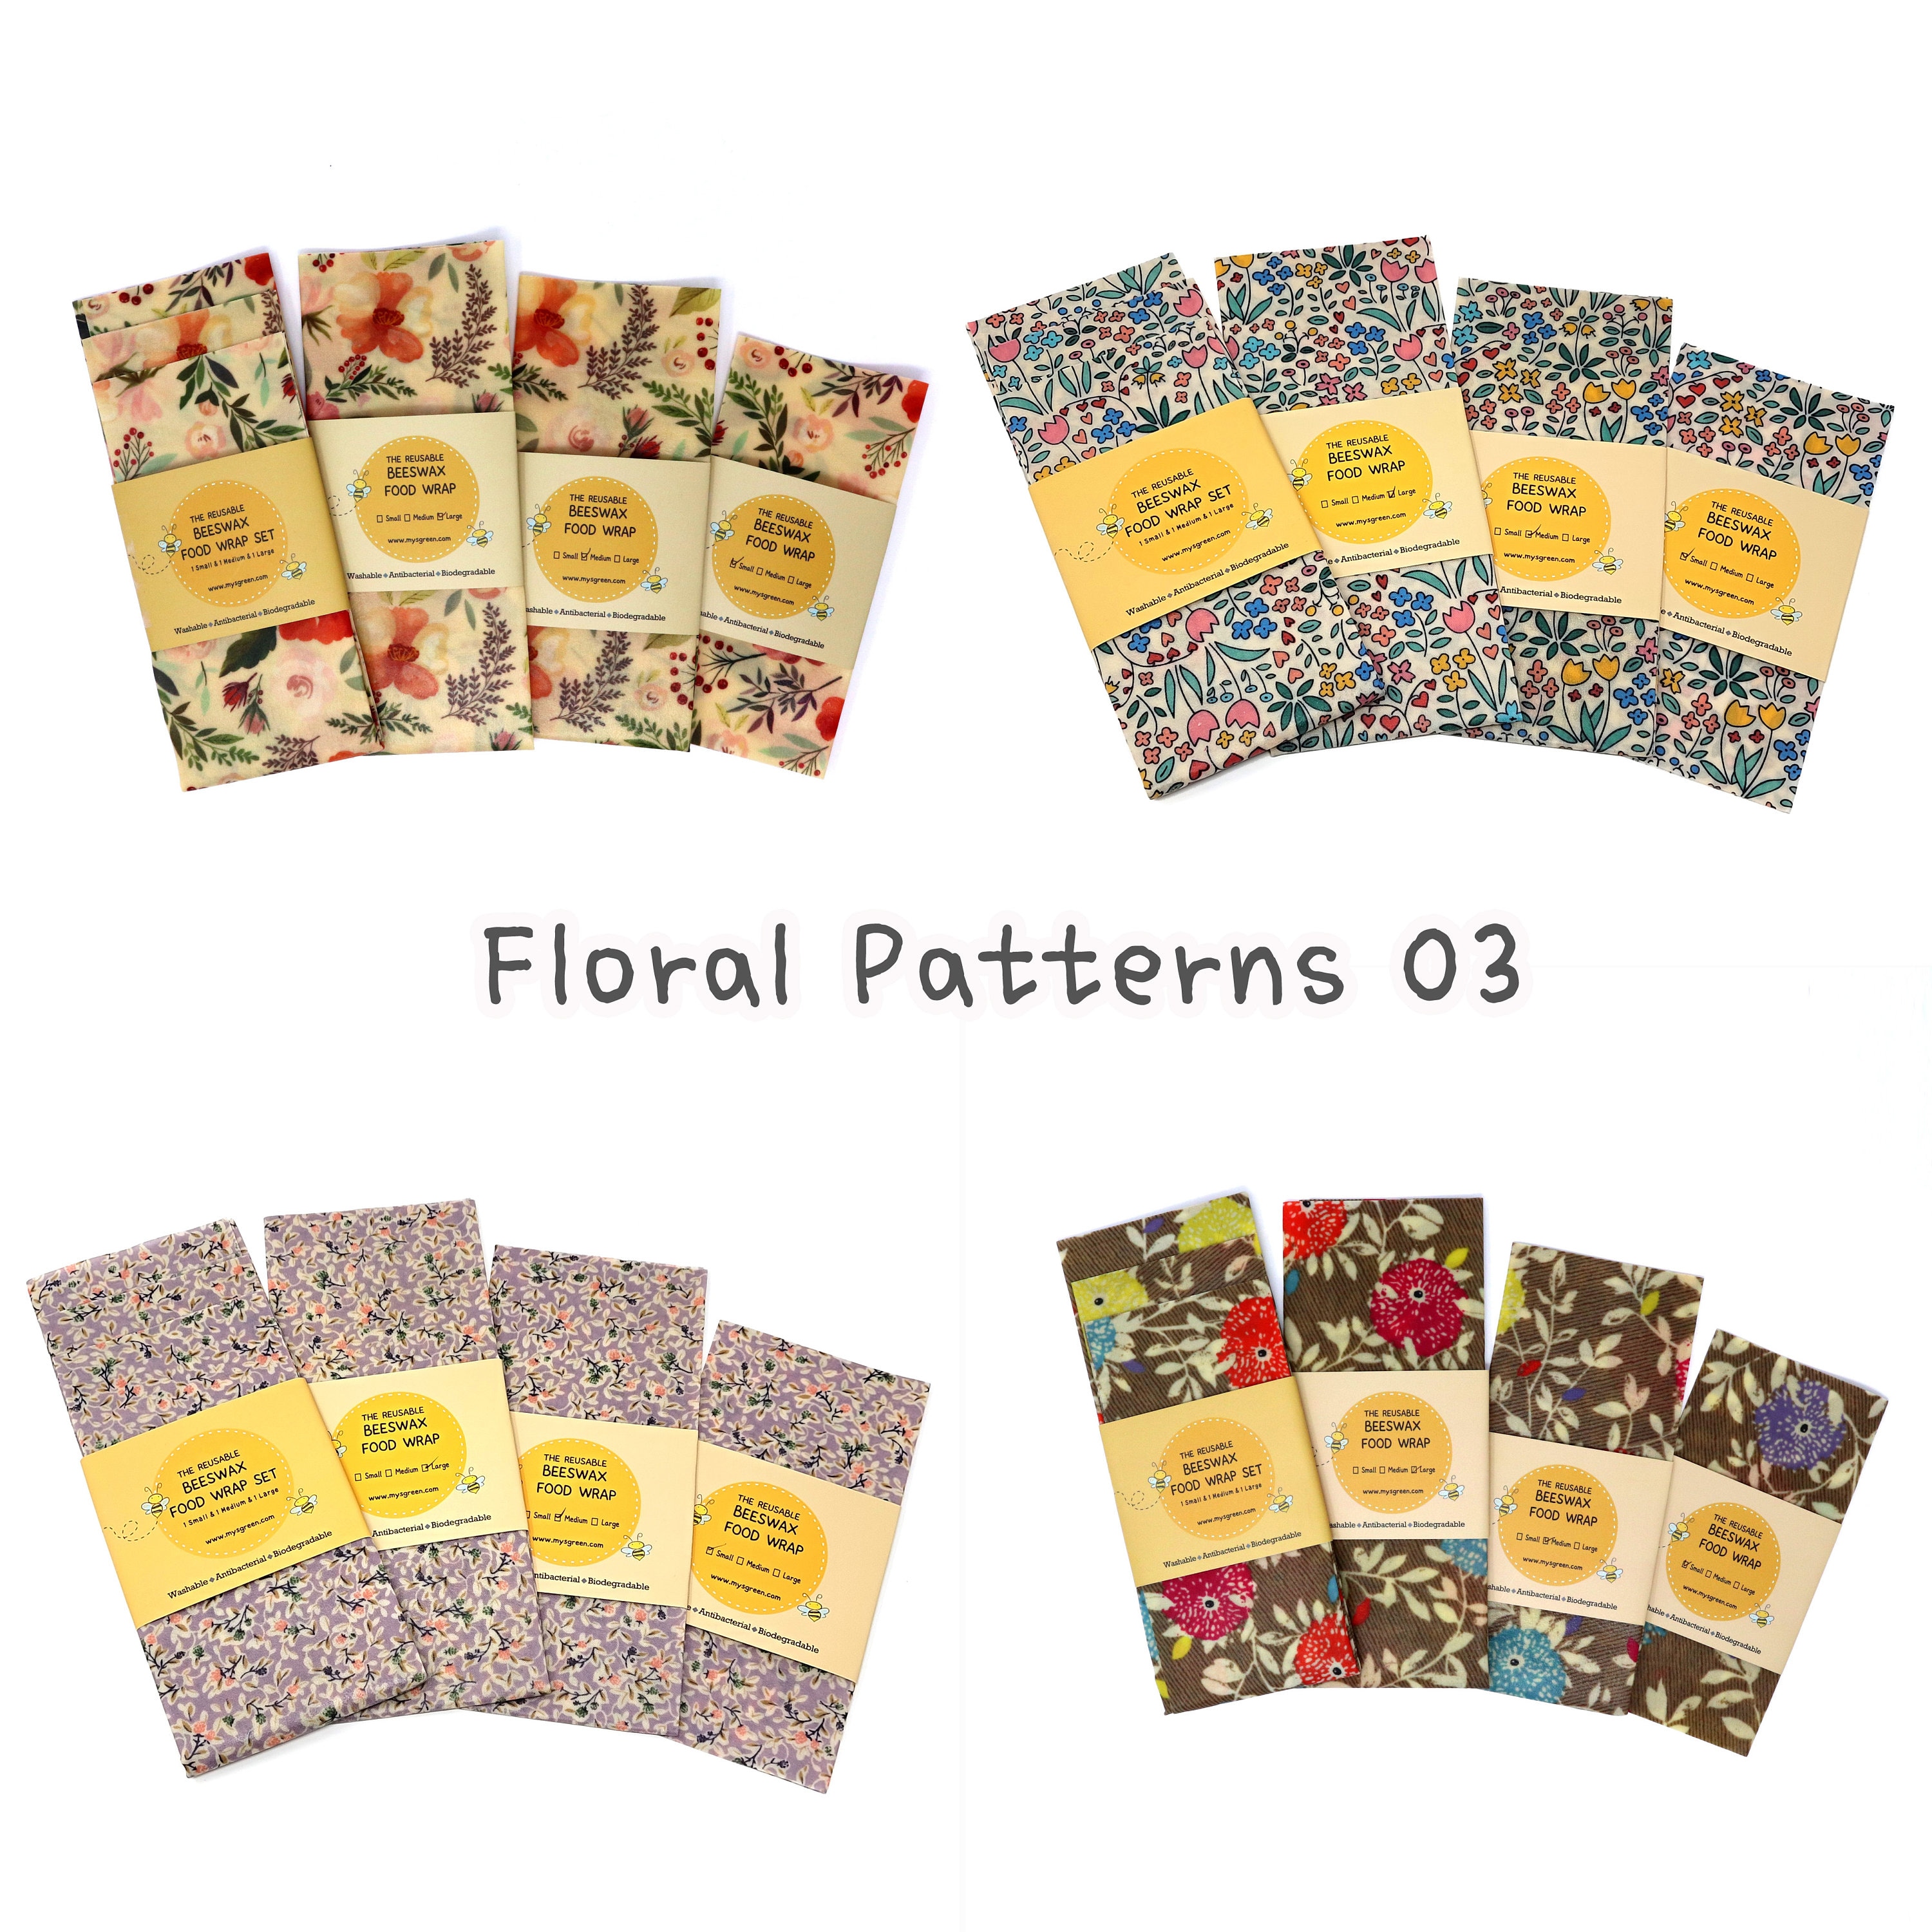 Floral Patterns Beeswax Food Wraps Reusable Wax Wrap Beeswax 